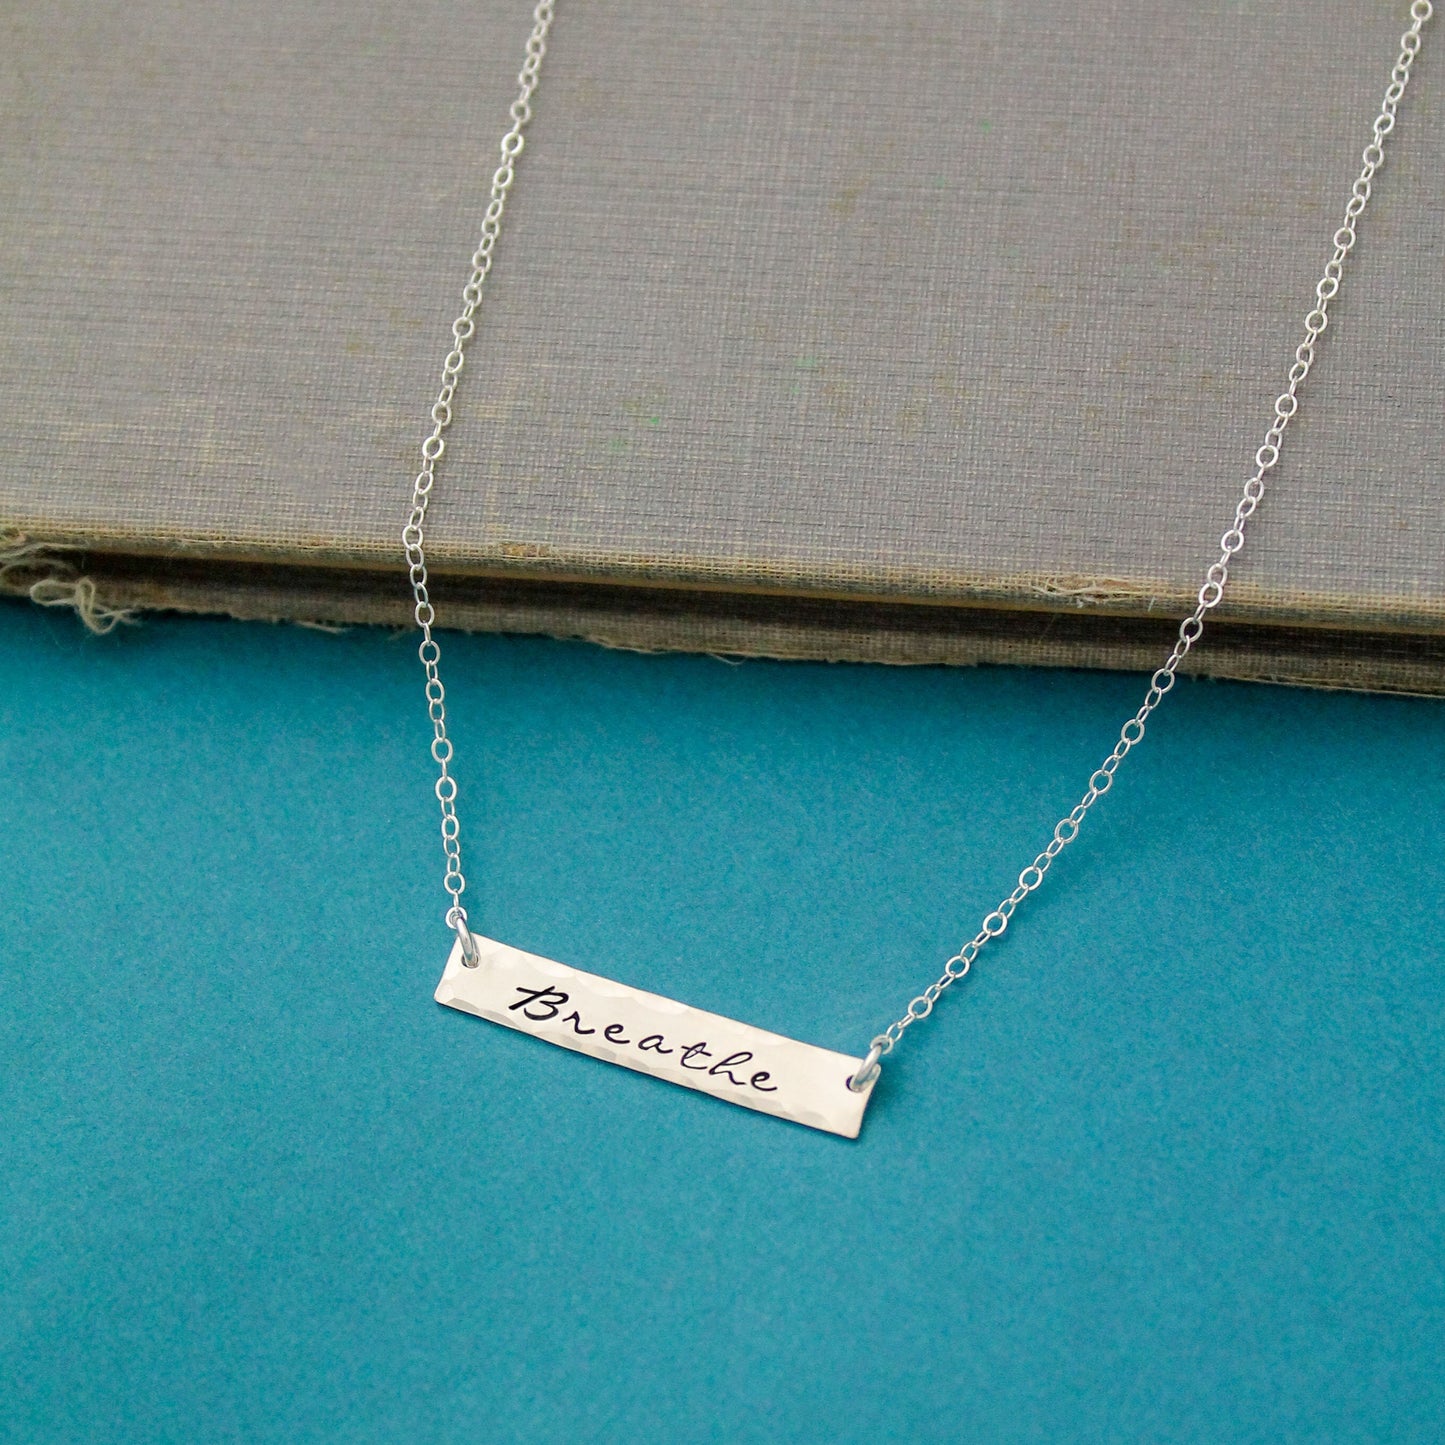 Sterling Silver Breathe Bar Necklace, Just Breathe Necklace, Personalized Bar Necklace, Silver Bar Necklace, Unique Hand Stamped Jewelry